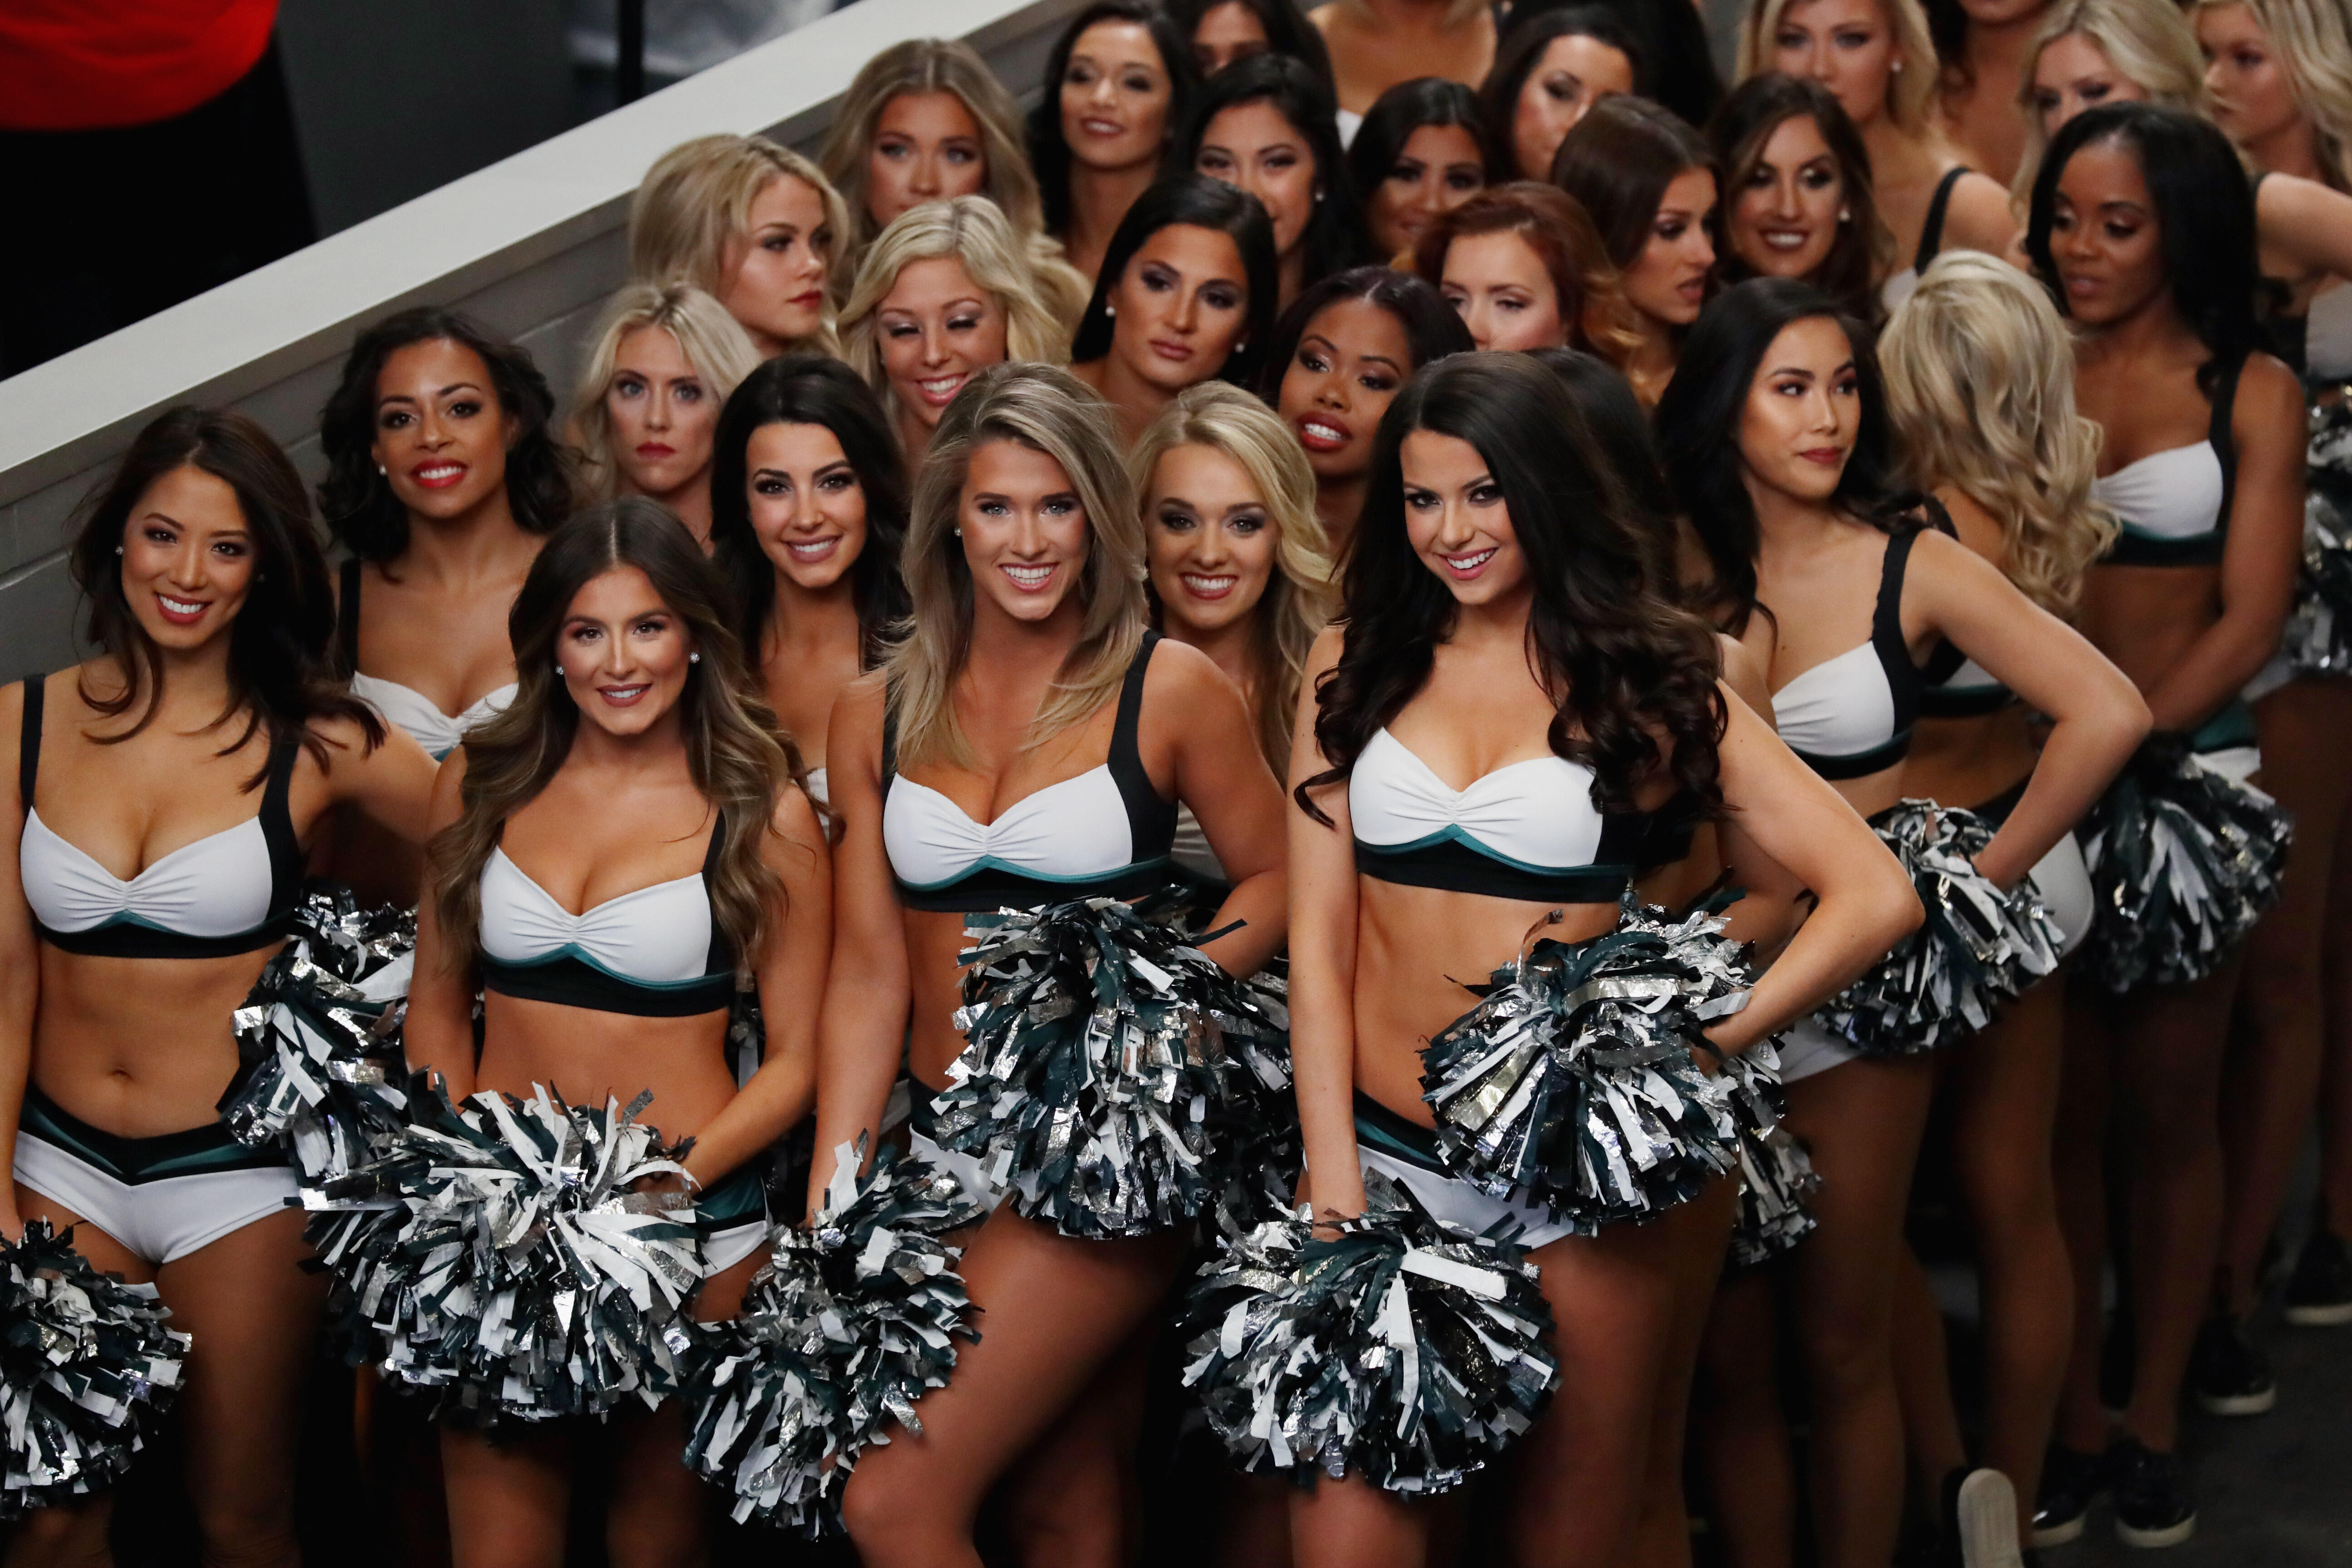 NFL Cheerleaders on Many Teams Must Abide by Strict Rules